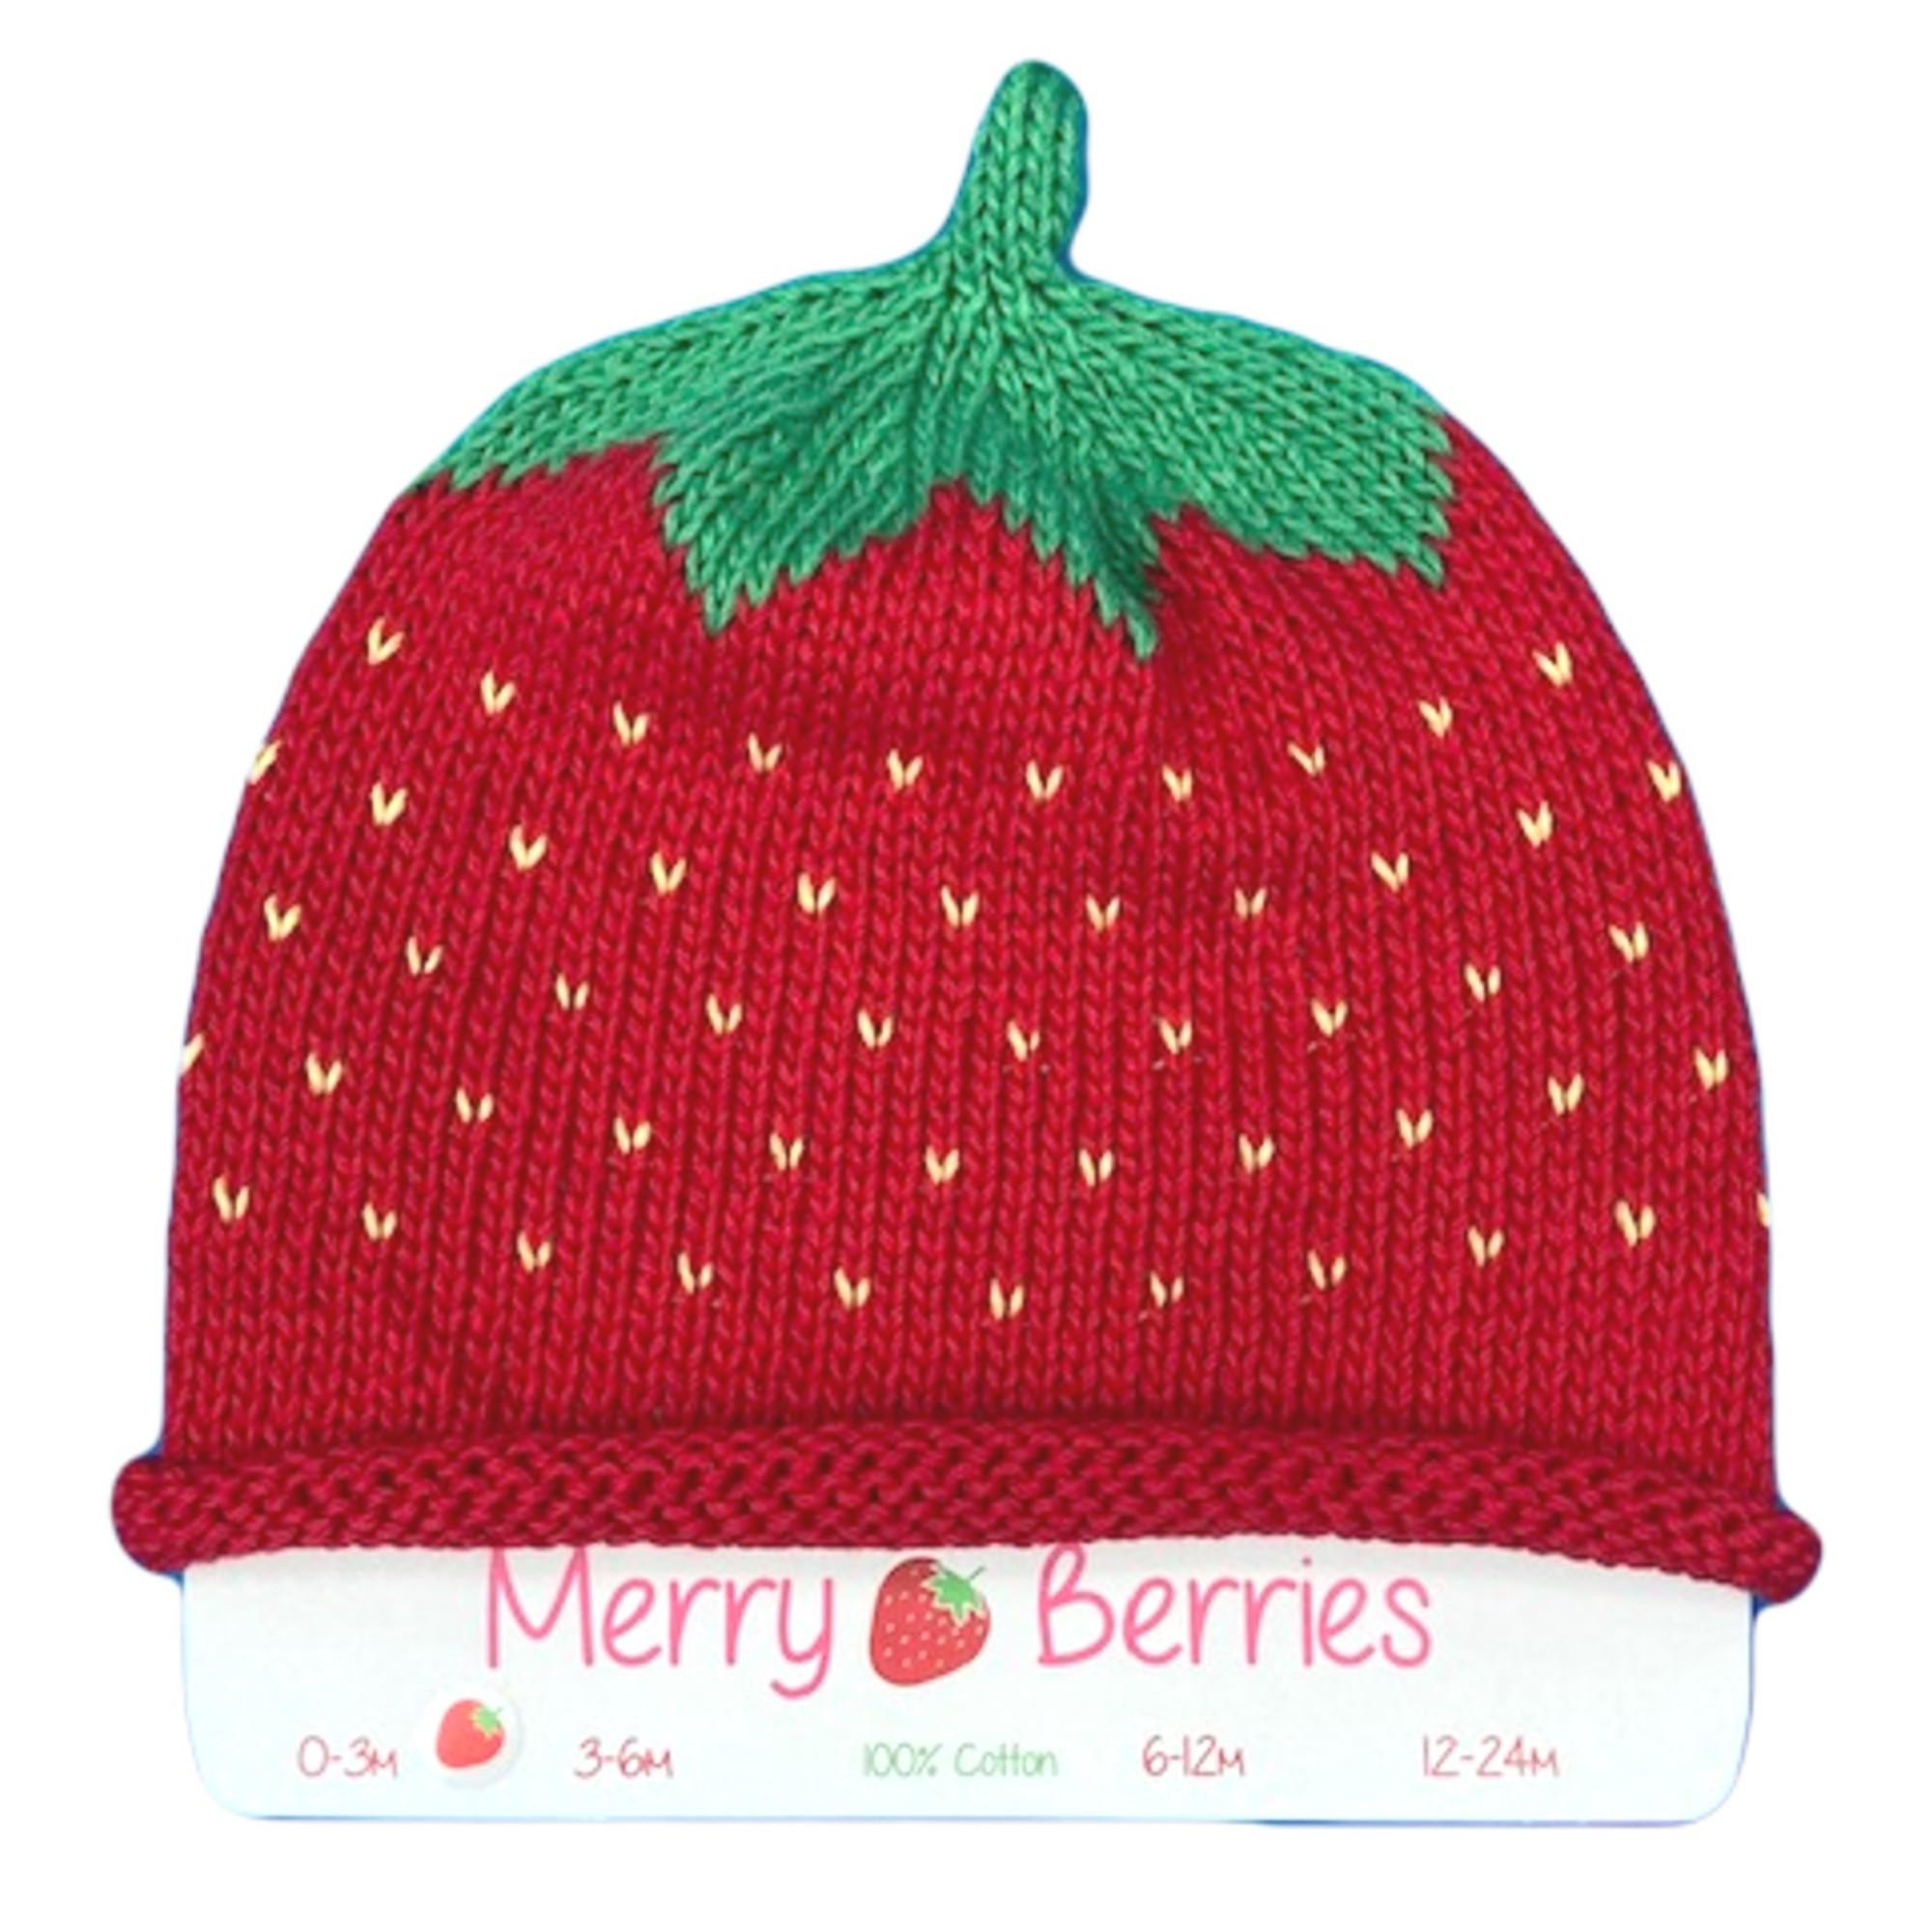 Roux Il Eve Merry Berries | Strawberry Knitted Baby Hat | 100% Cotton